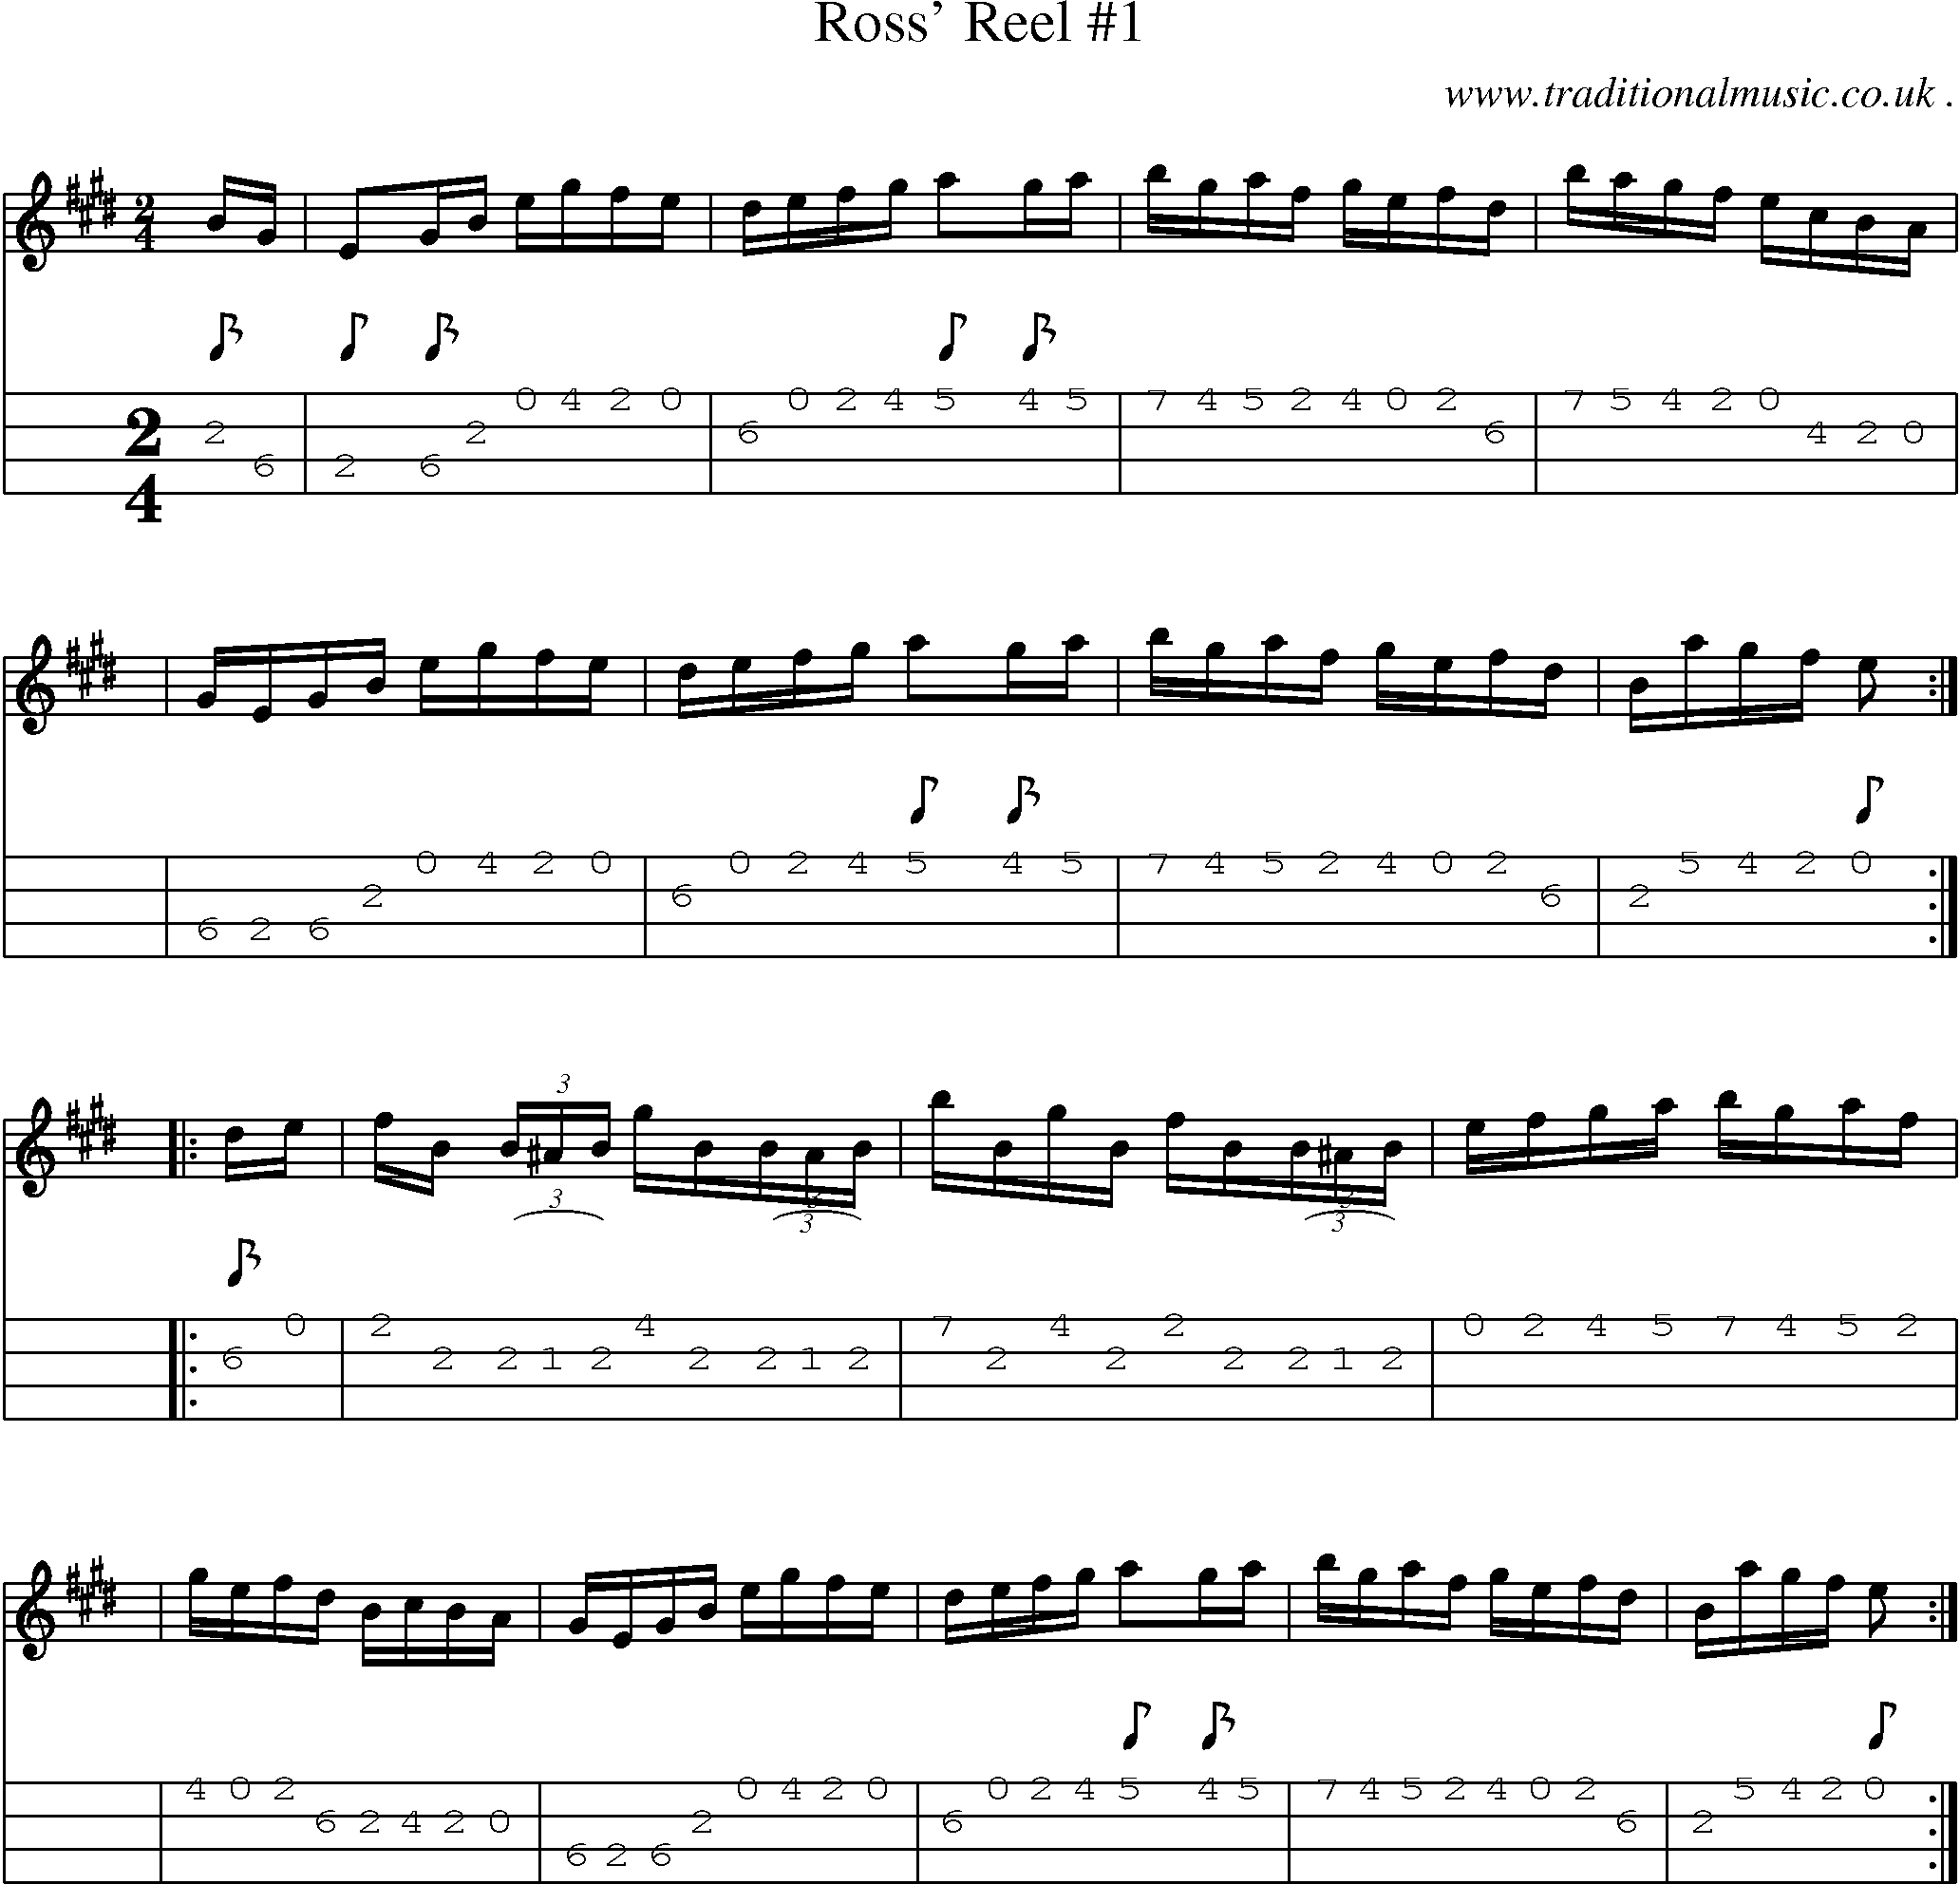 Sheet-music  score, Chords and Mandolin Tabs for Ross Reel 1